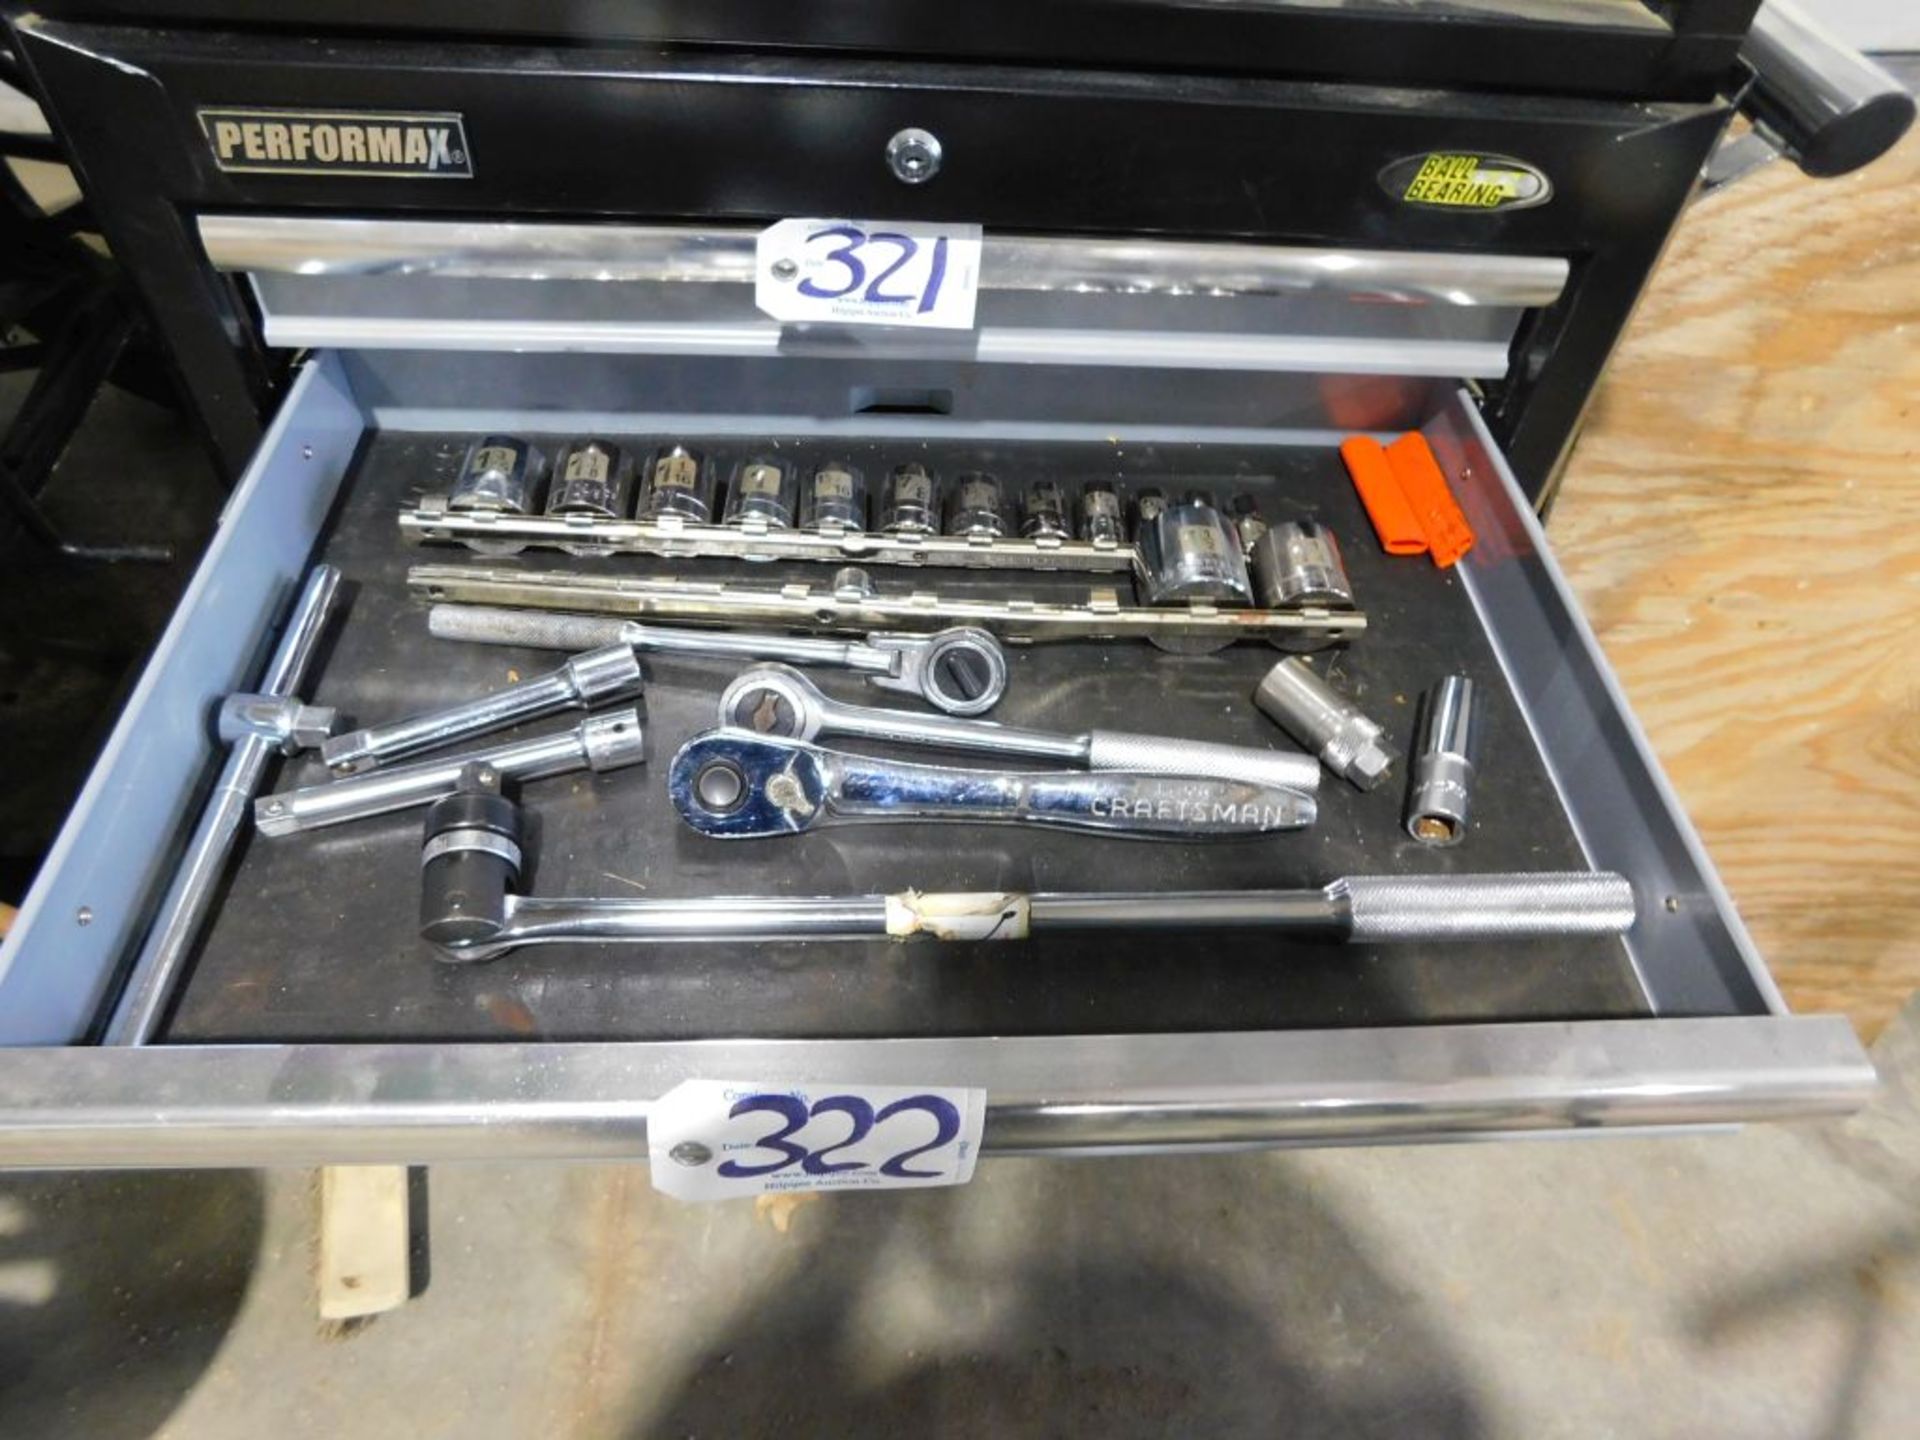 Assorted tools contents of drawer: SAE, sockets, ratchets, breaker bar, (approx. 27 pcs.) (Located